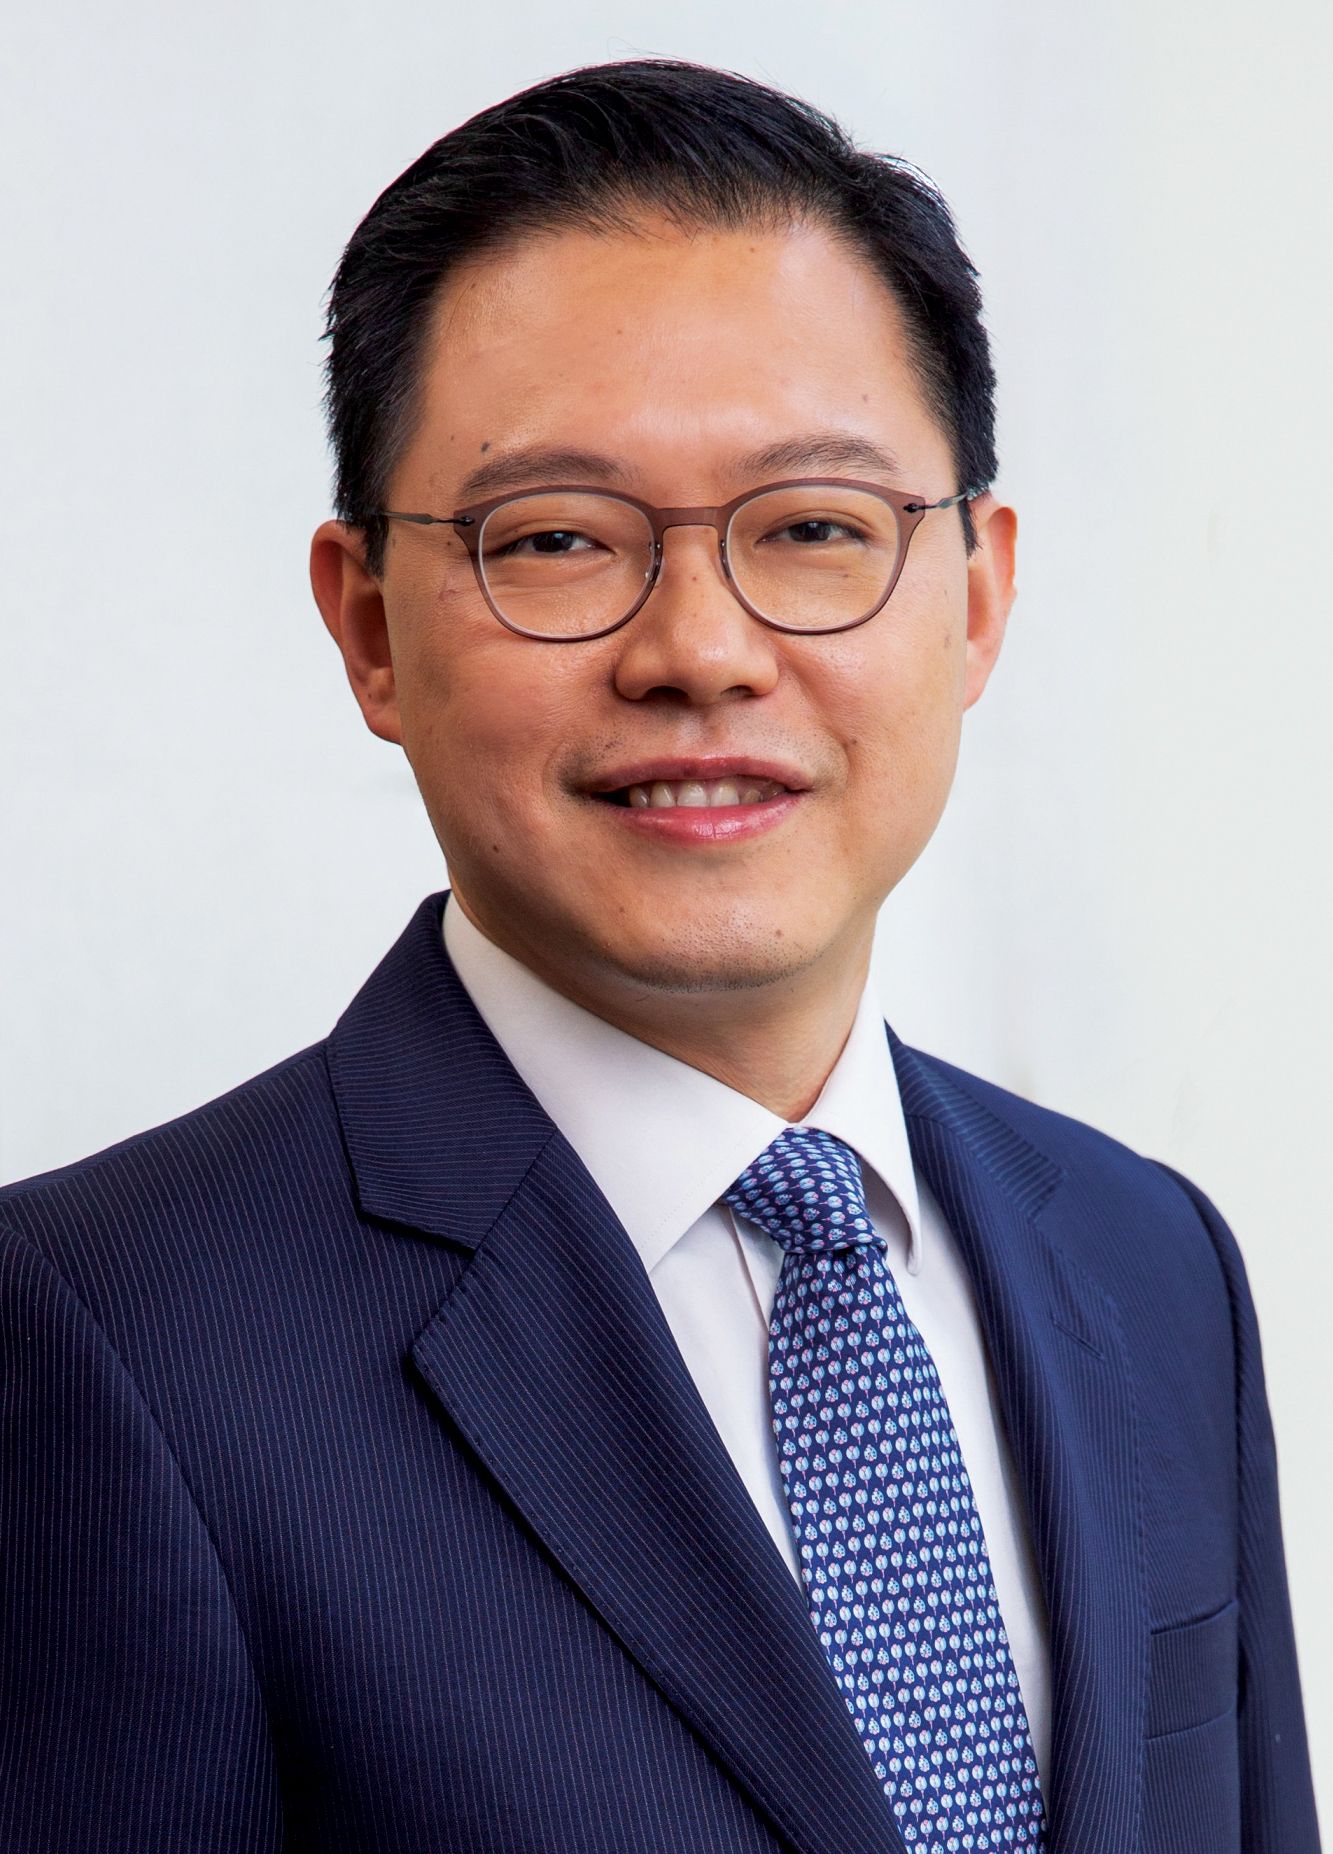 Edmund Leong, UOB managing director and head, group investment banking